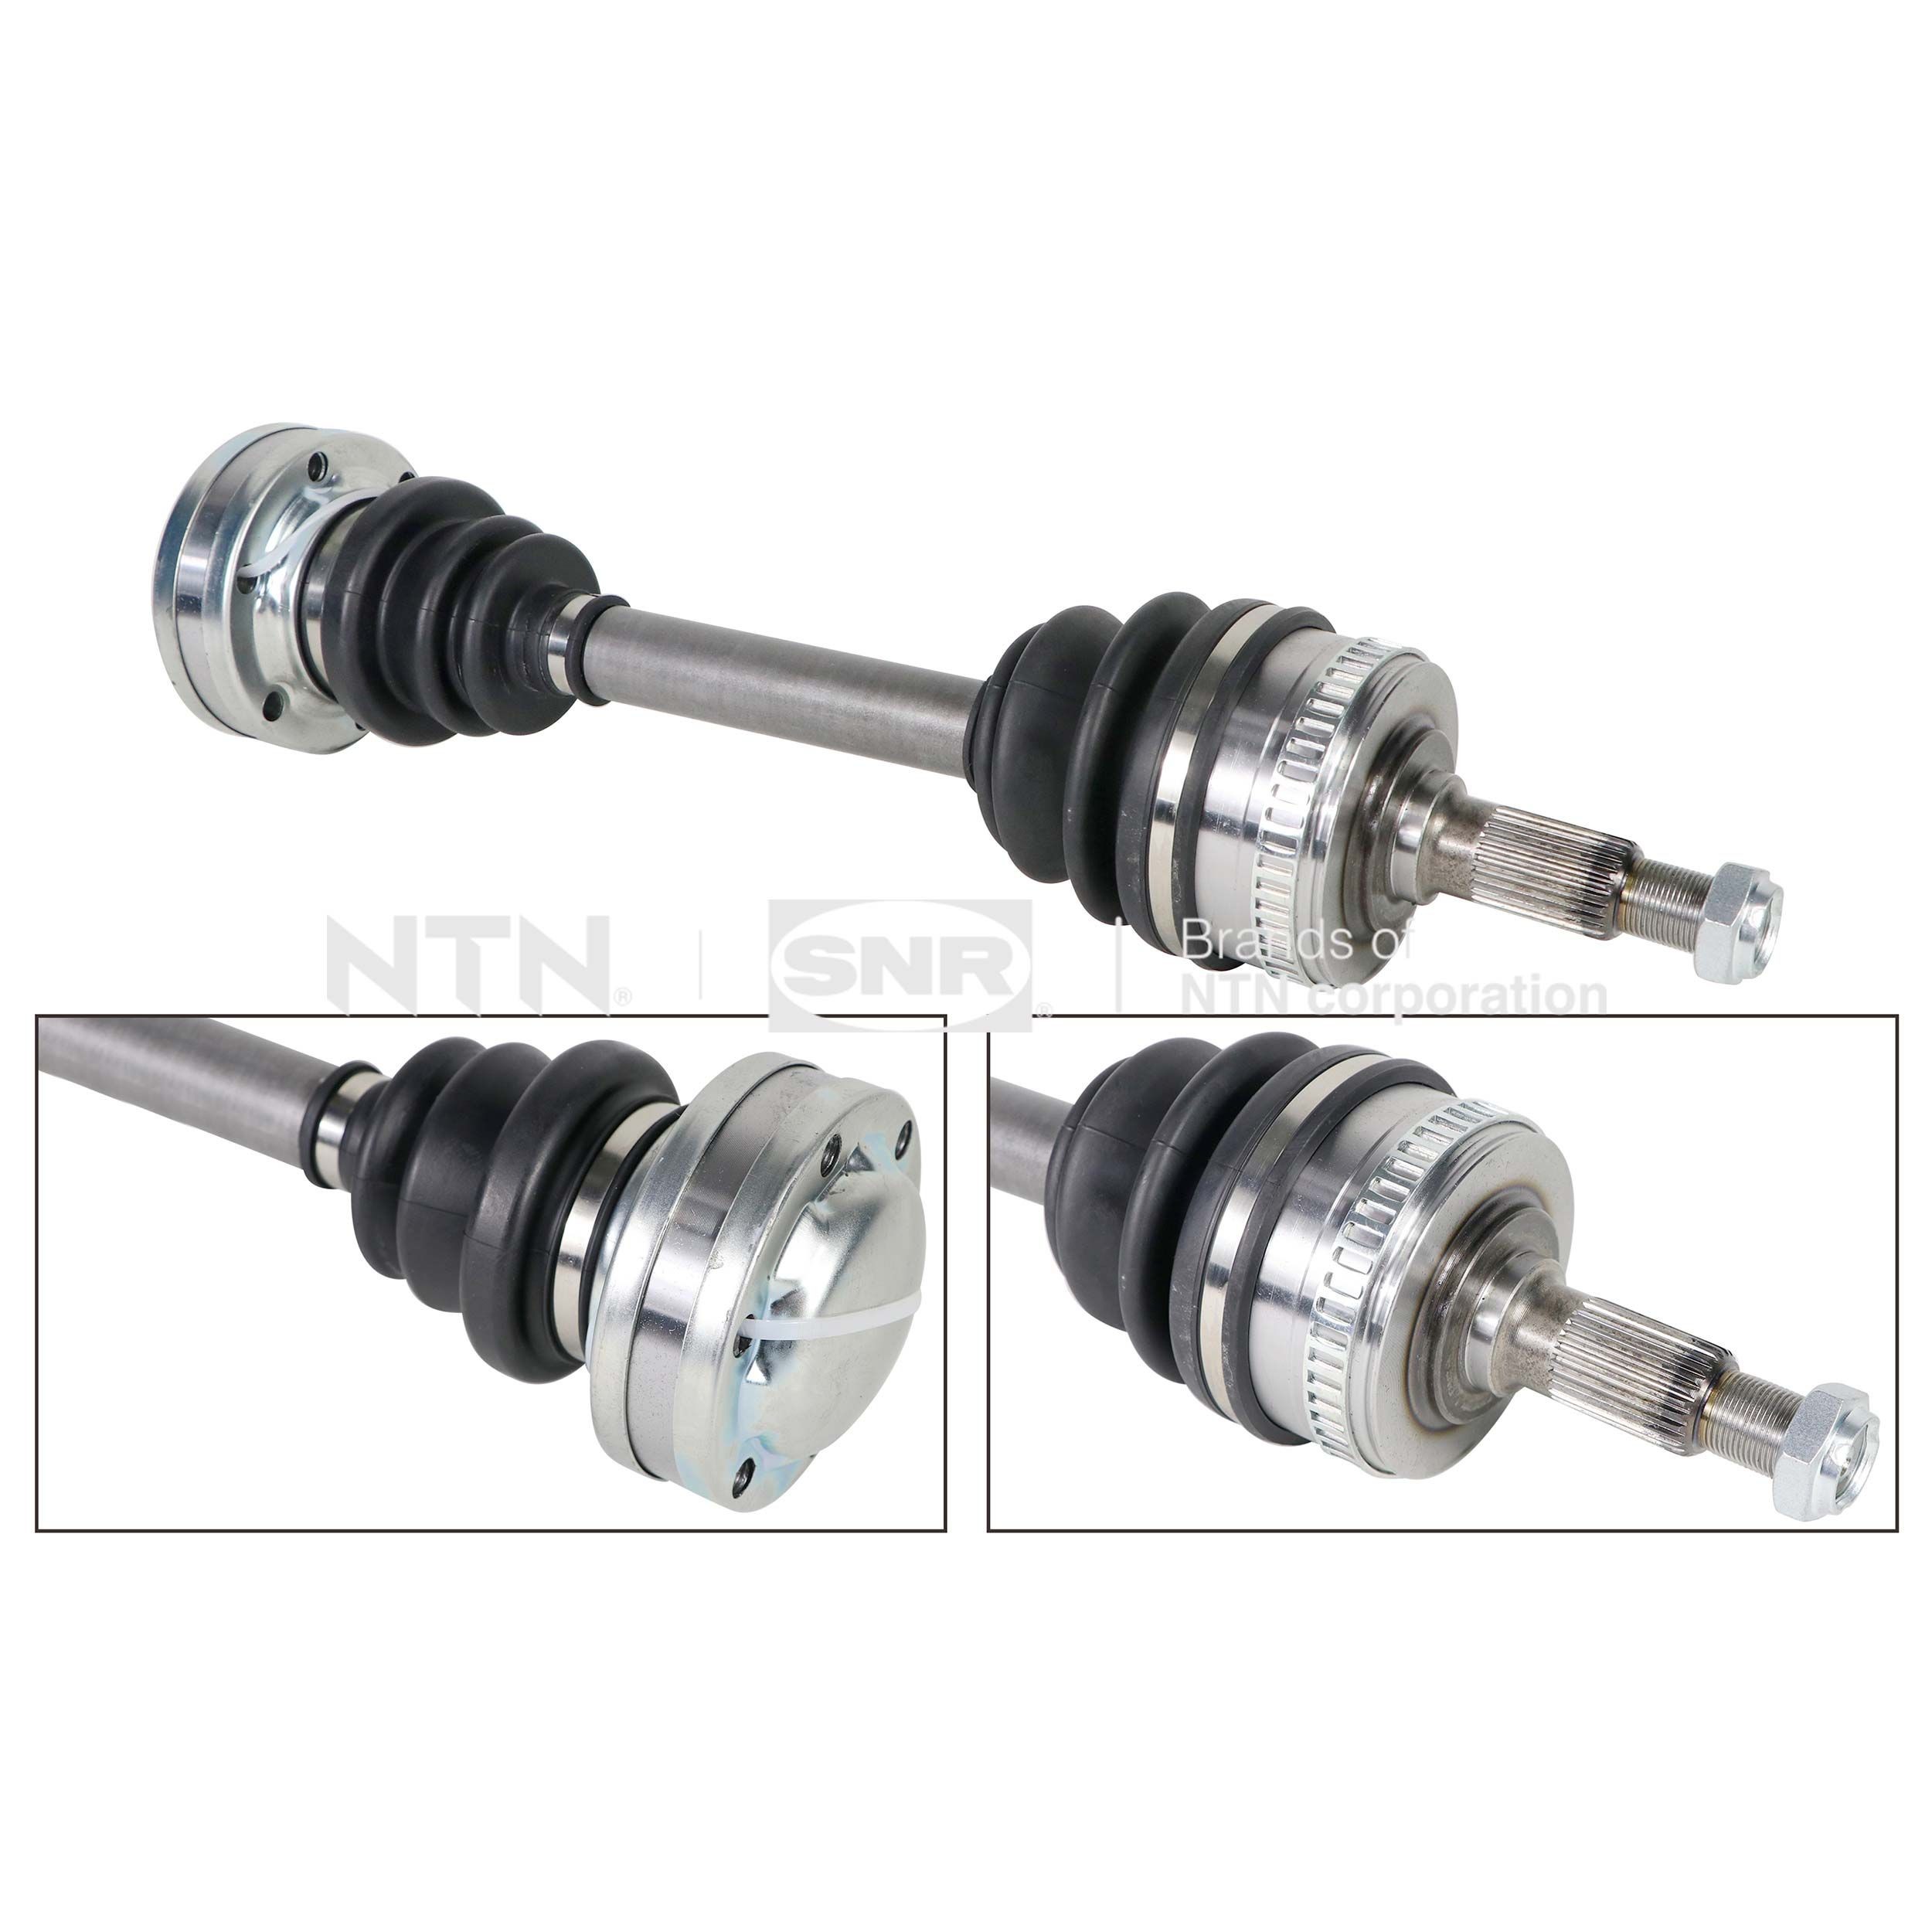 SNR DK51.008 Drive shaft MERCEDES-BENZ experience and price